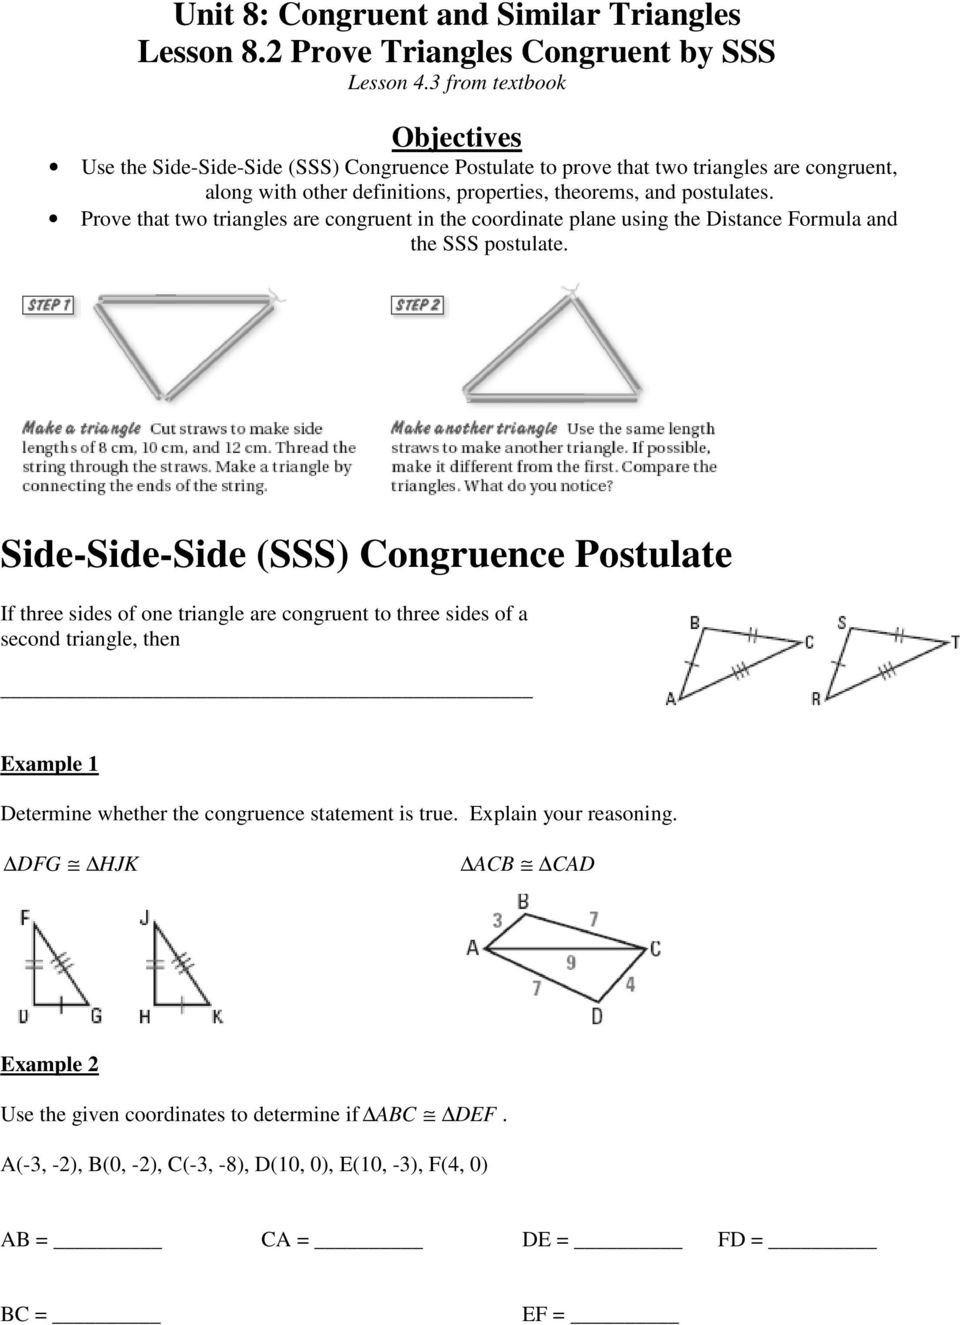 Proving Triangles Similar Worksheet Unit 8 Congruent and Similar Triangles Lesson 8 1 Apply